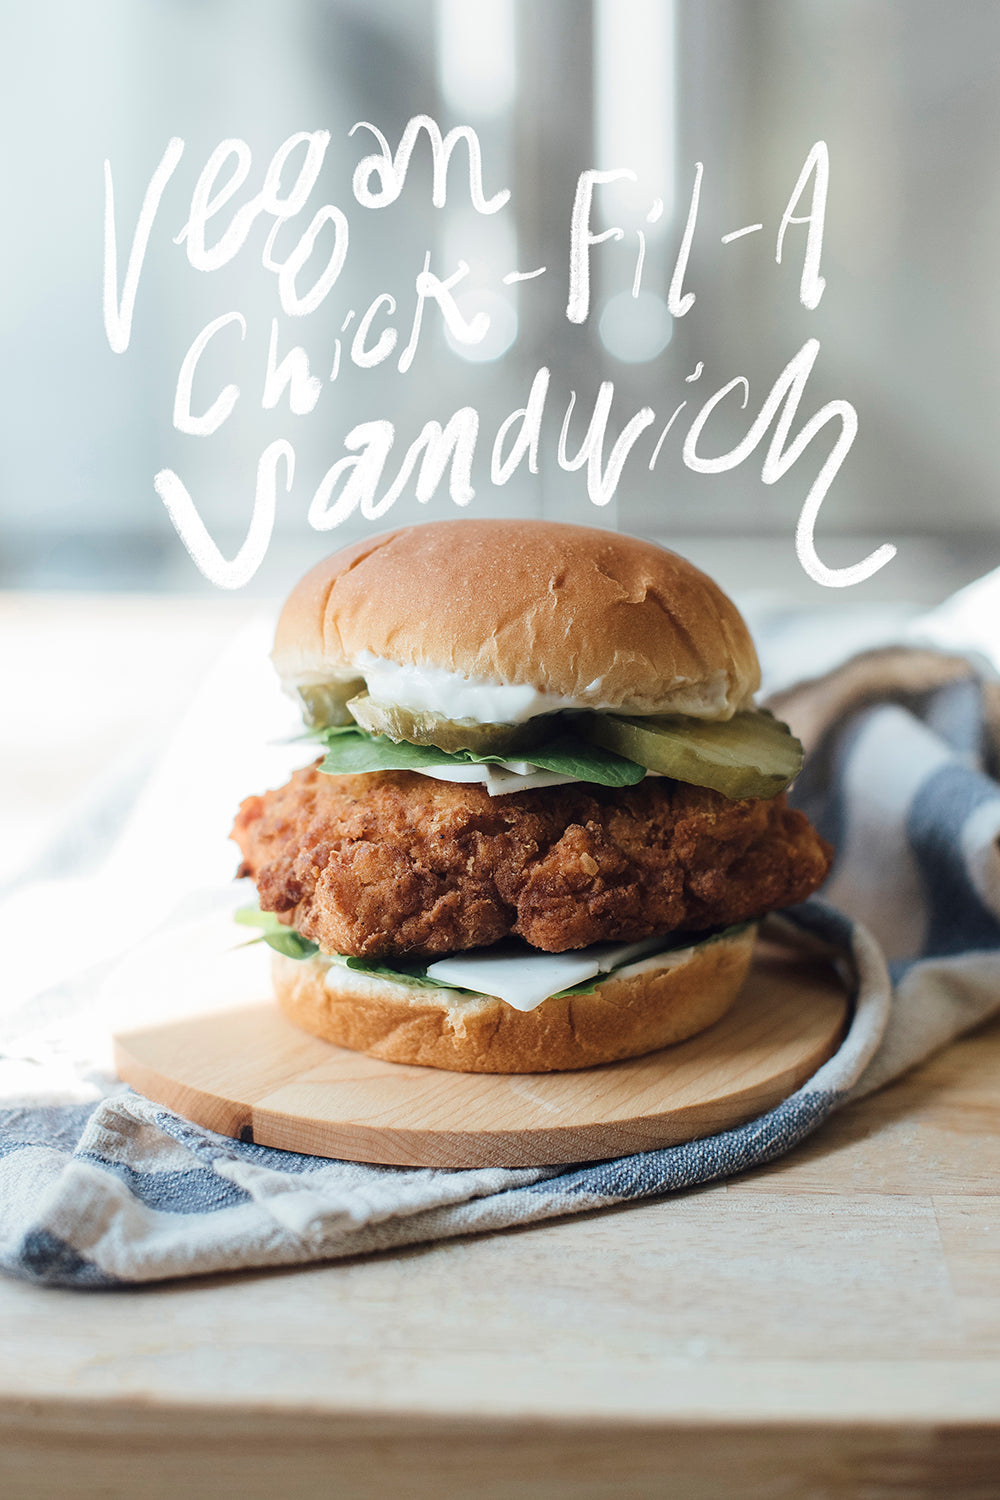 edgy veg book review (and vegan chick-fil-a recipe!)